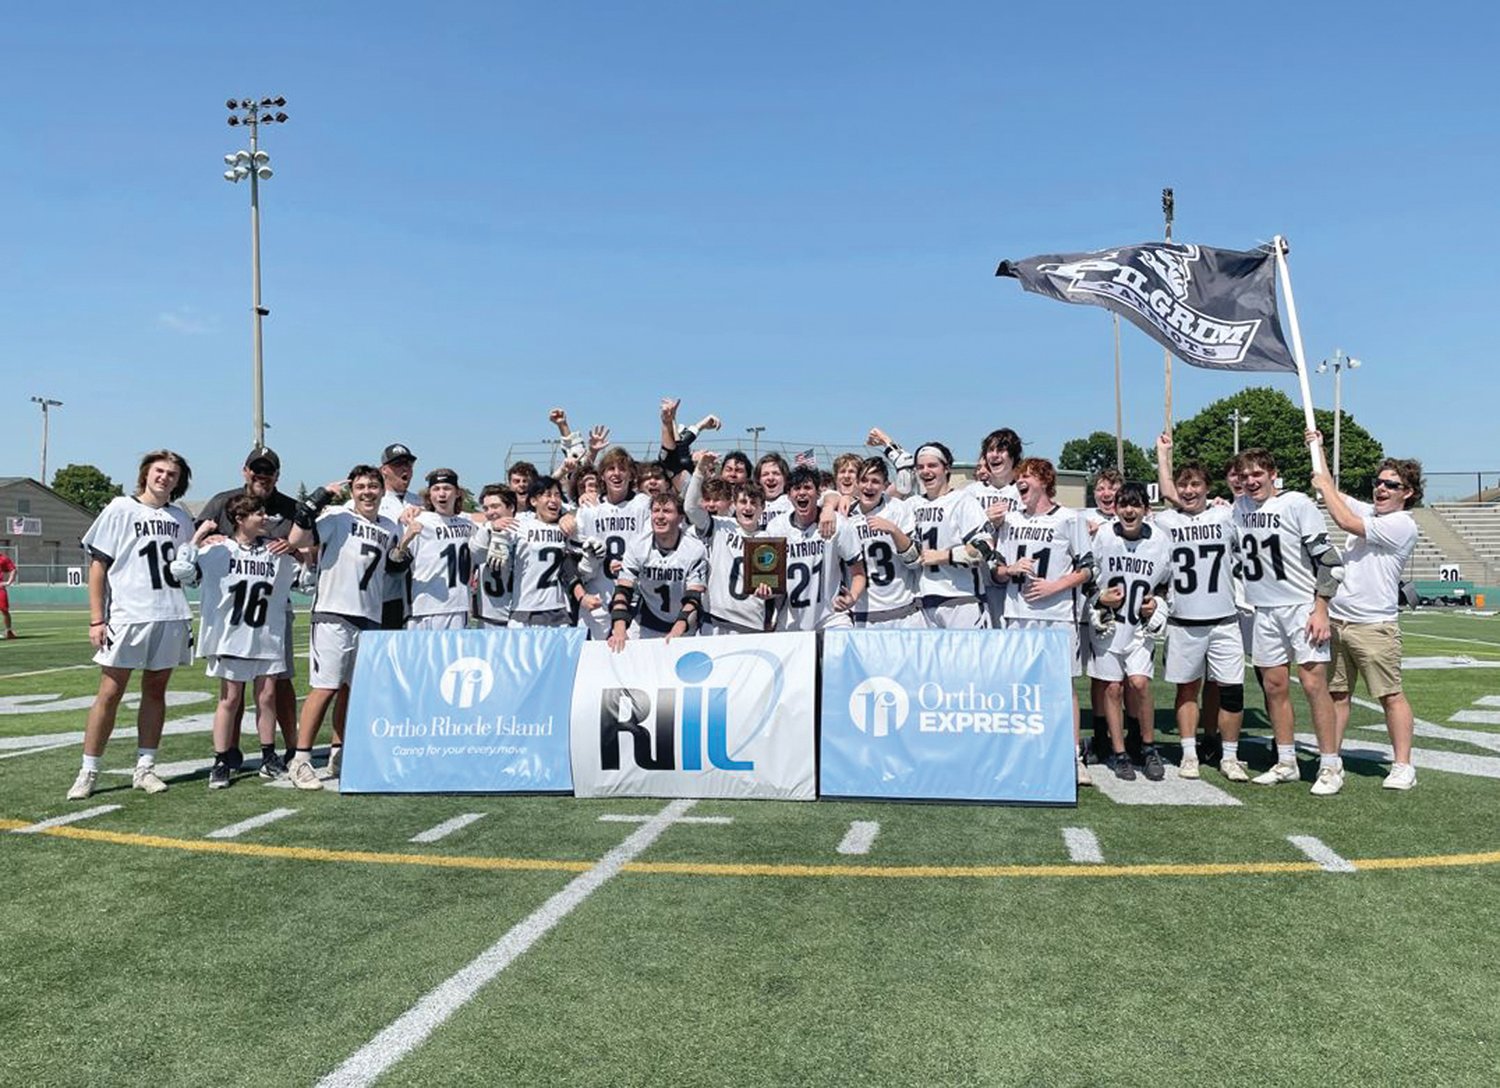 STATE CHAMPS: The Pilgrim boys lacrosse team after winning the DIII title last weekend at Cranston Stadium. (Photos by Ryan D. Murray)